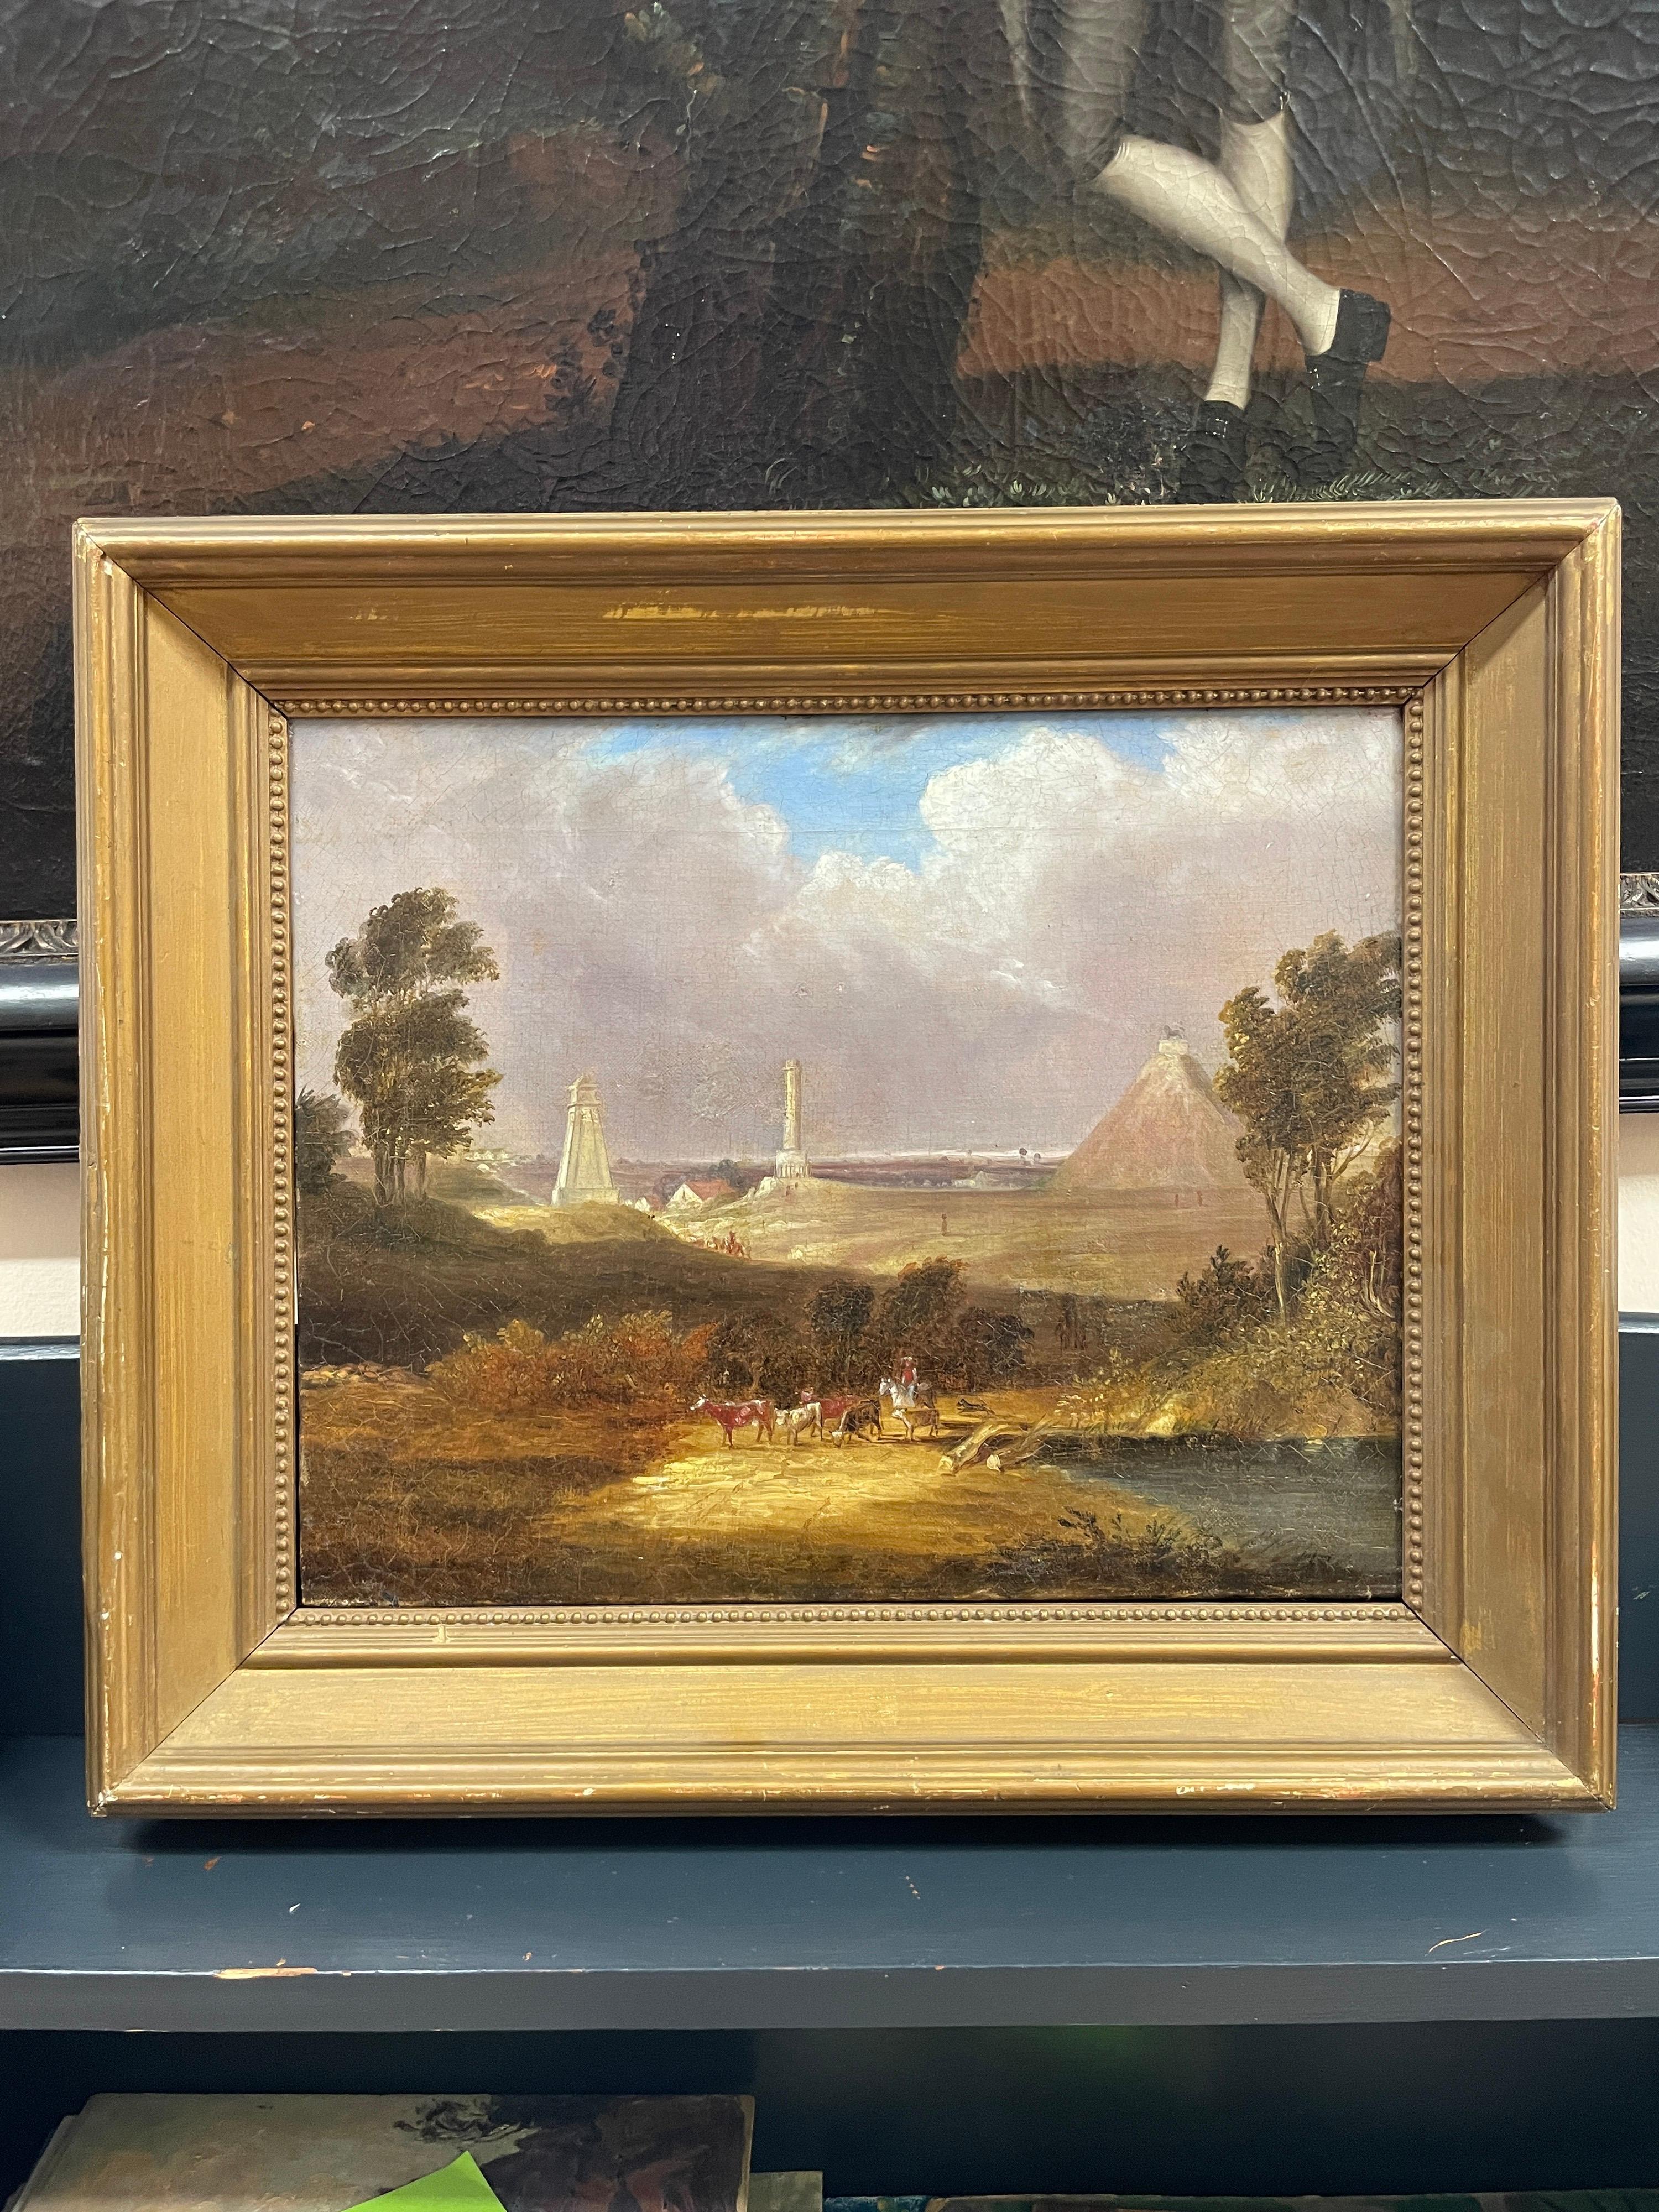 Waterloo Battlefield with 3 Monuments - Butte du Lion, Antique Oil Painting - Brown Landscape Painting by 1850's English